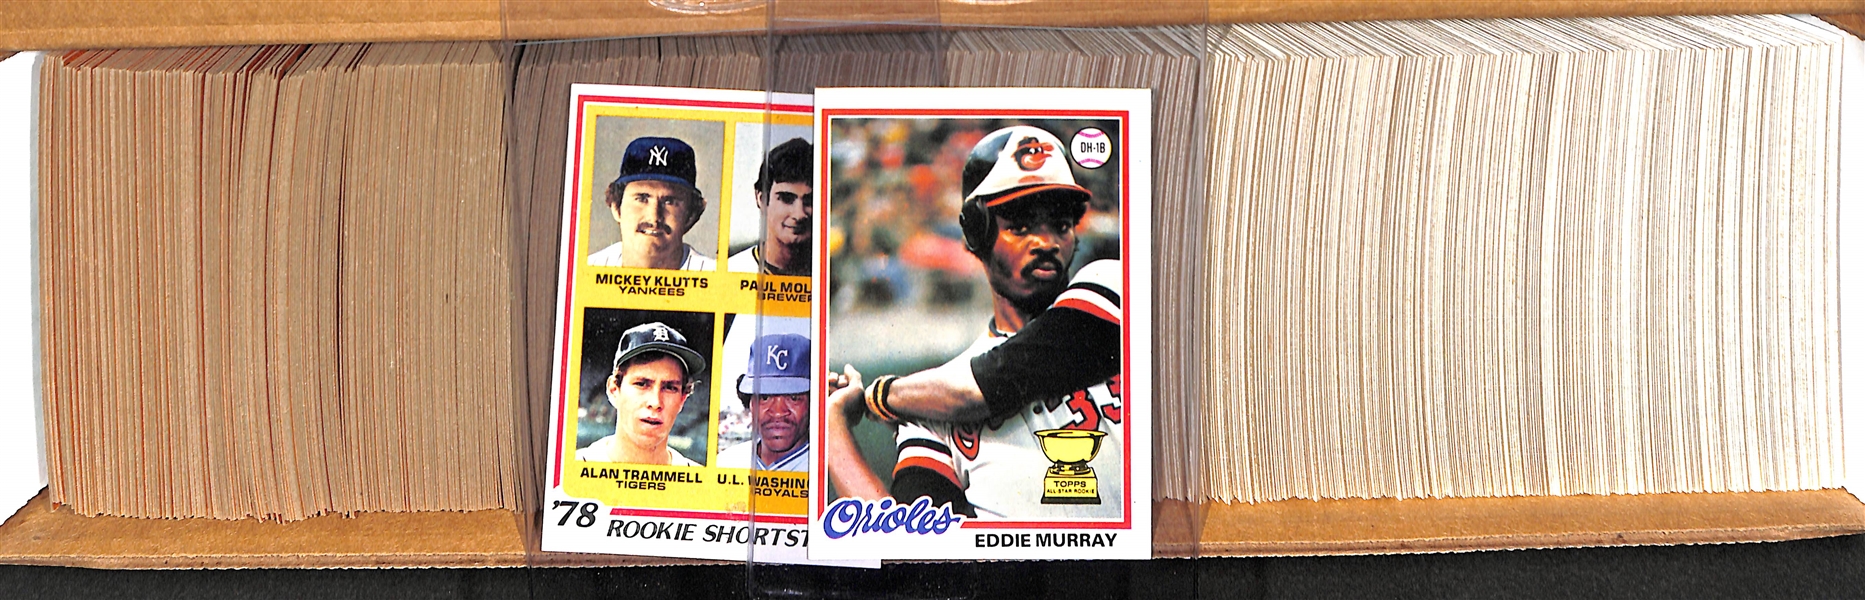  1978 Topps Baseball Complete Set of 726 Cards w. Eddie Murray Rookie & Molitor/Trammel Rookie Card